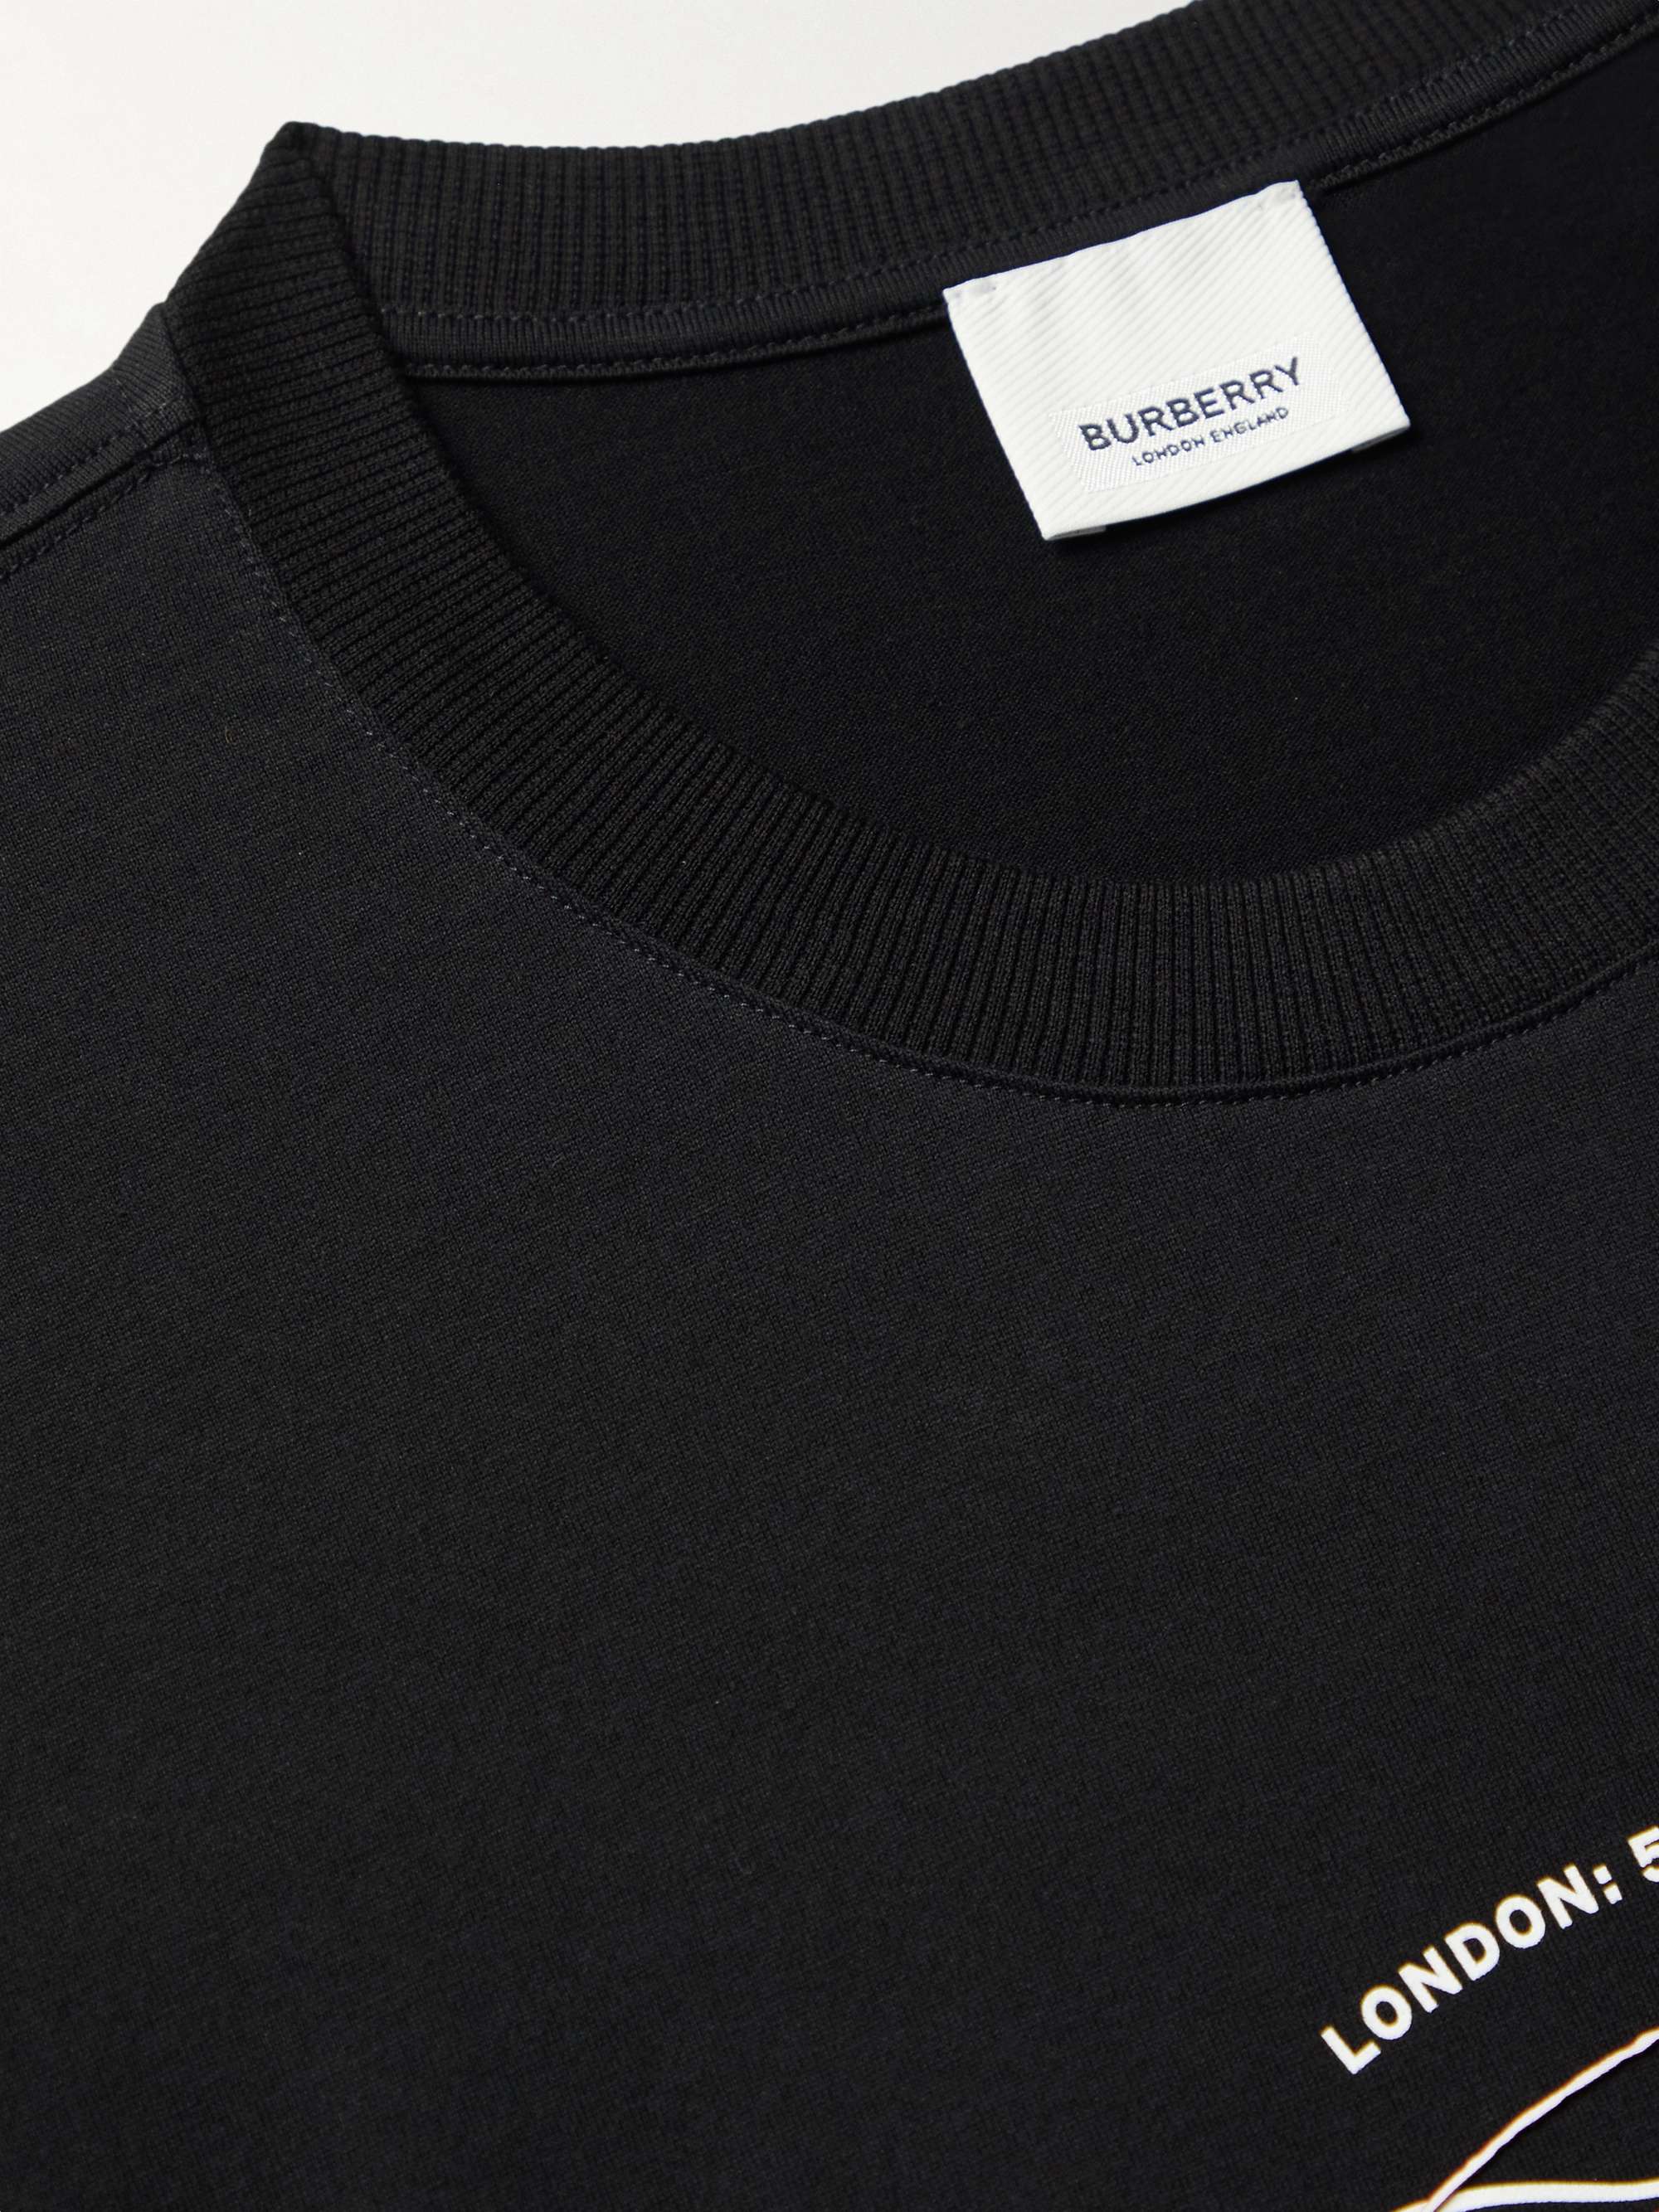 BURBERRY Printed Cotton-Jersey T-Shirt